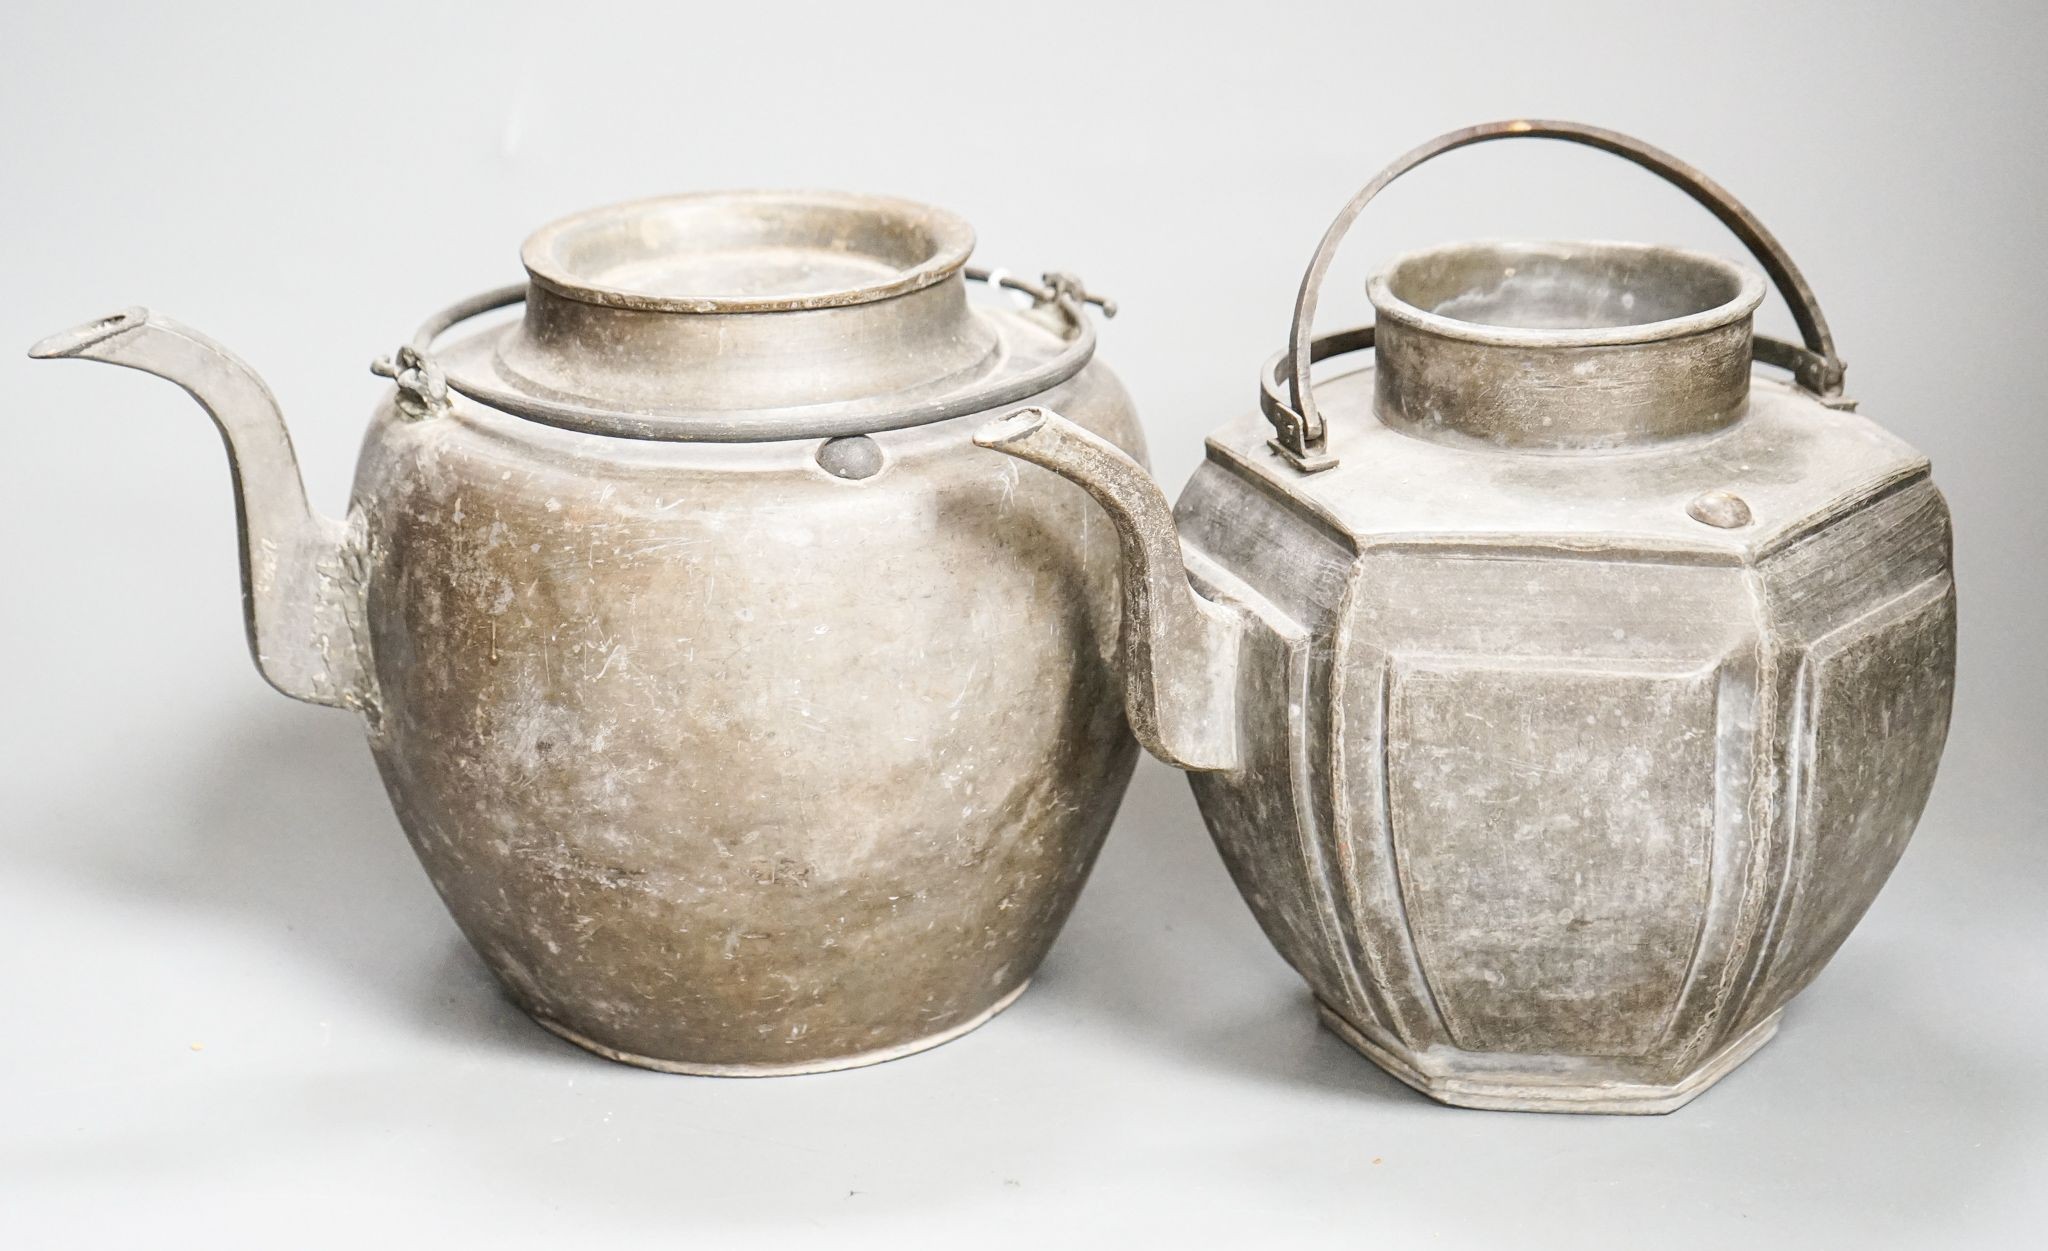 Two Chinese pewter teapots, late 19th/early 20th century, largest 23cm across